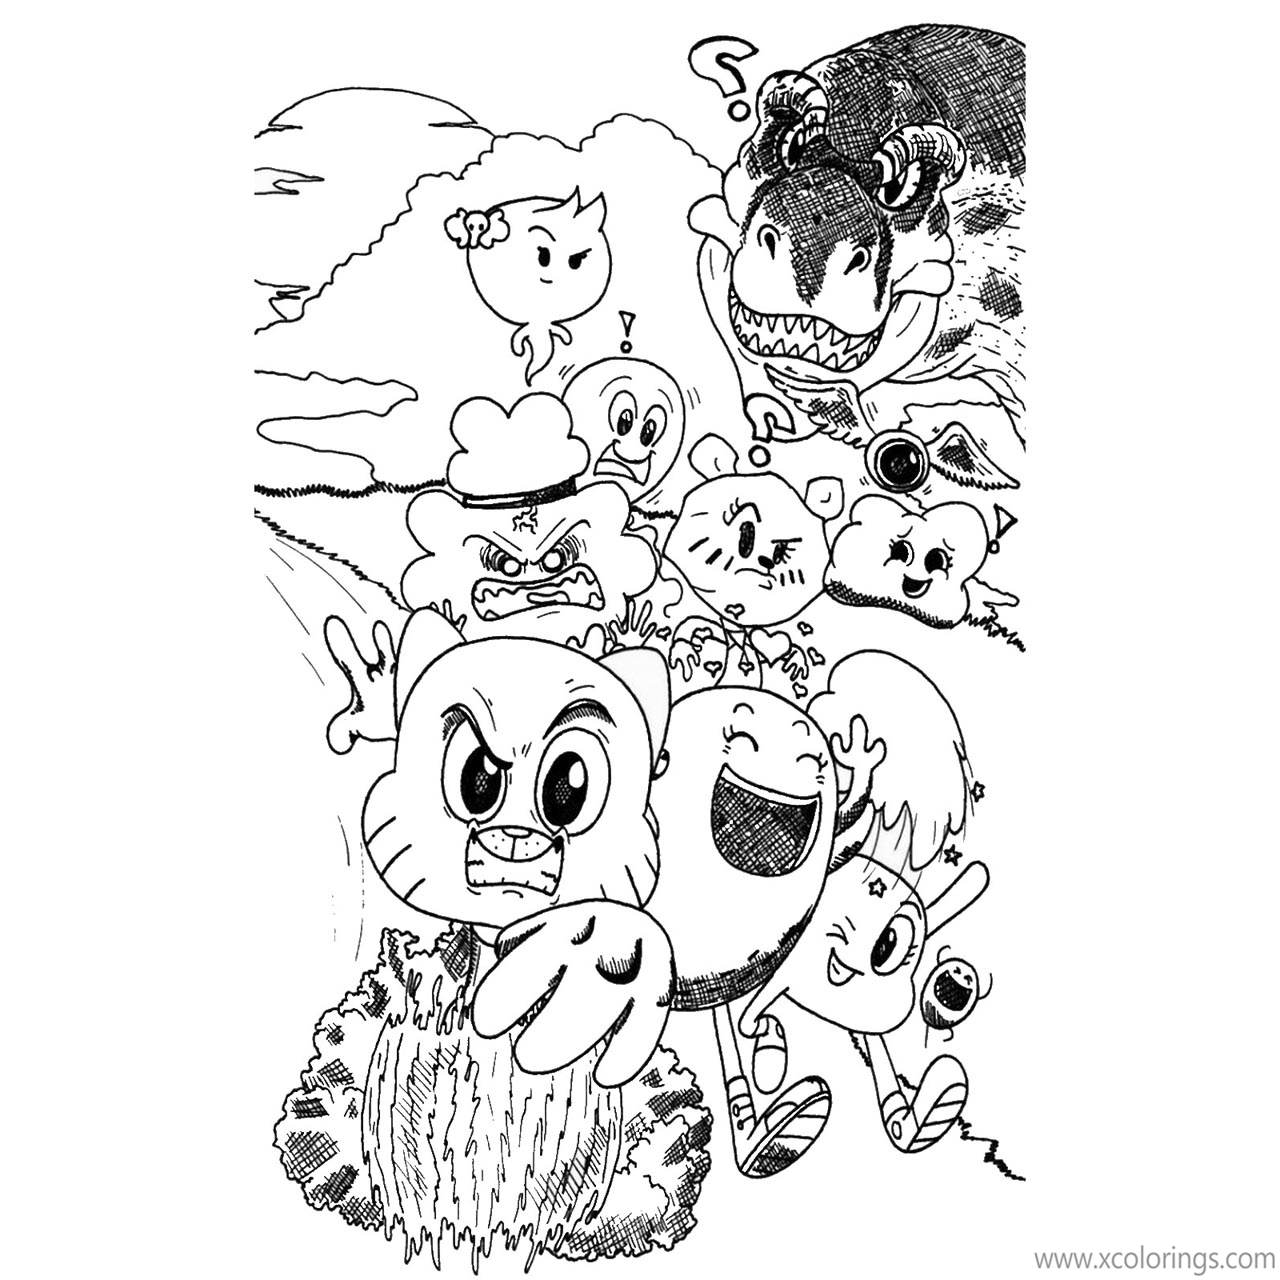 Free The Amazing World of Gumball Coloring Pages Gumball Watterson and Friends printable